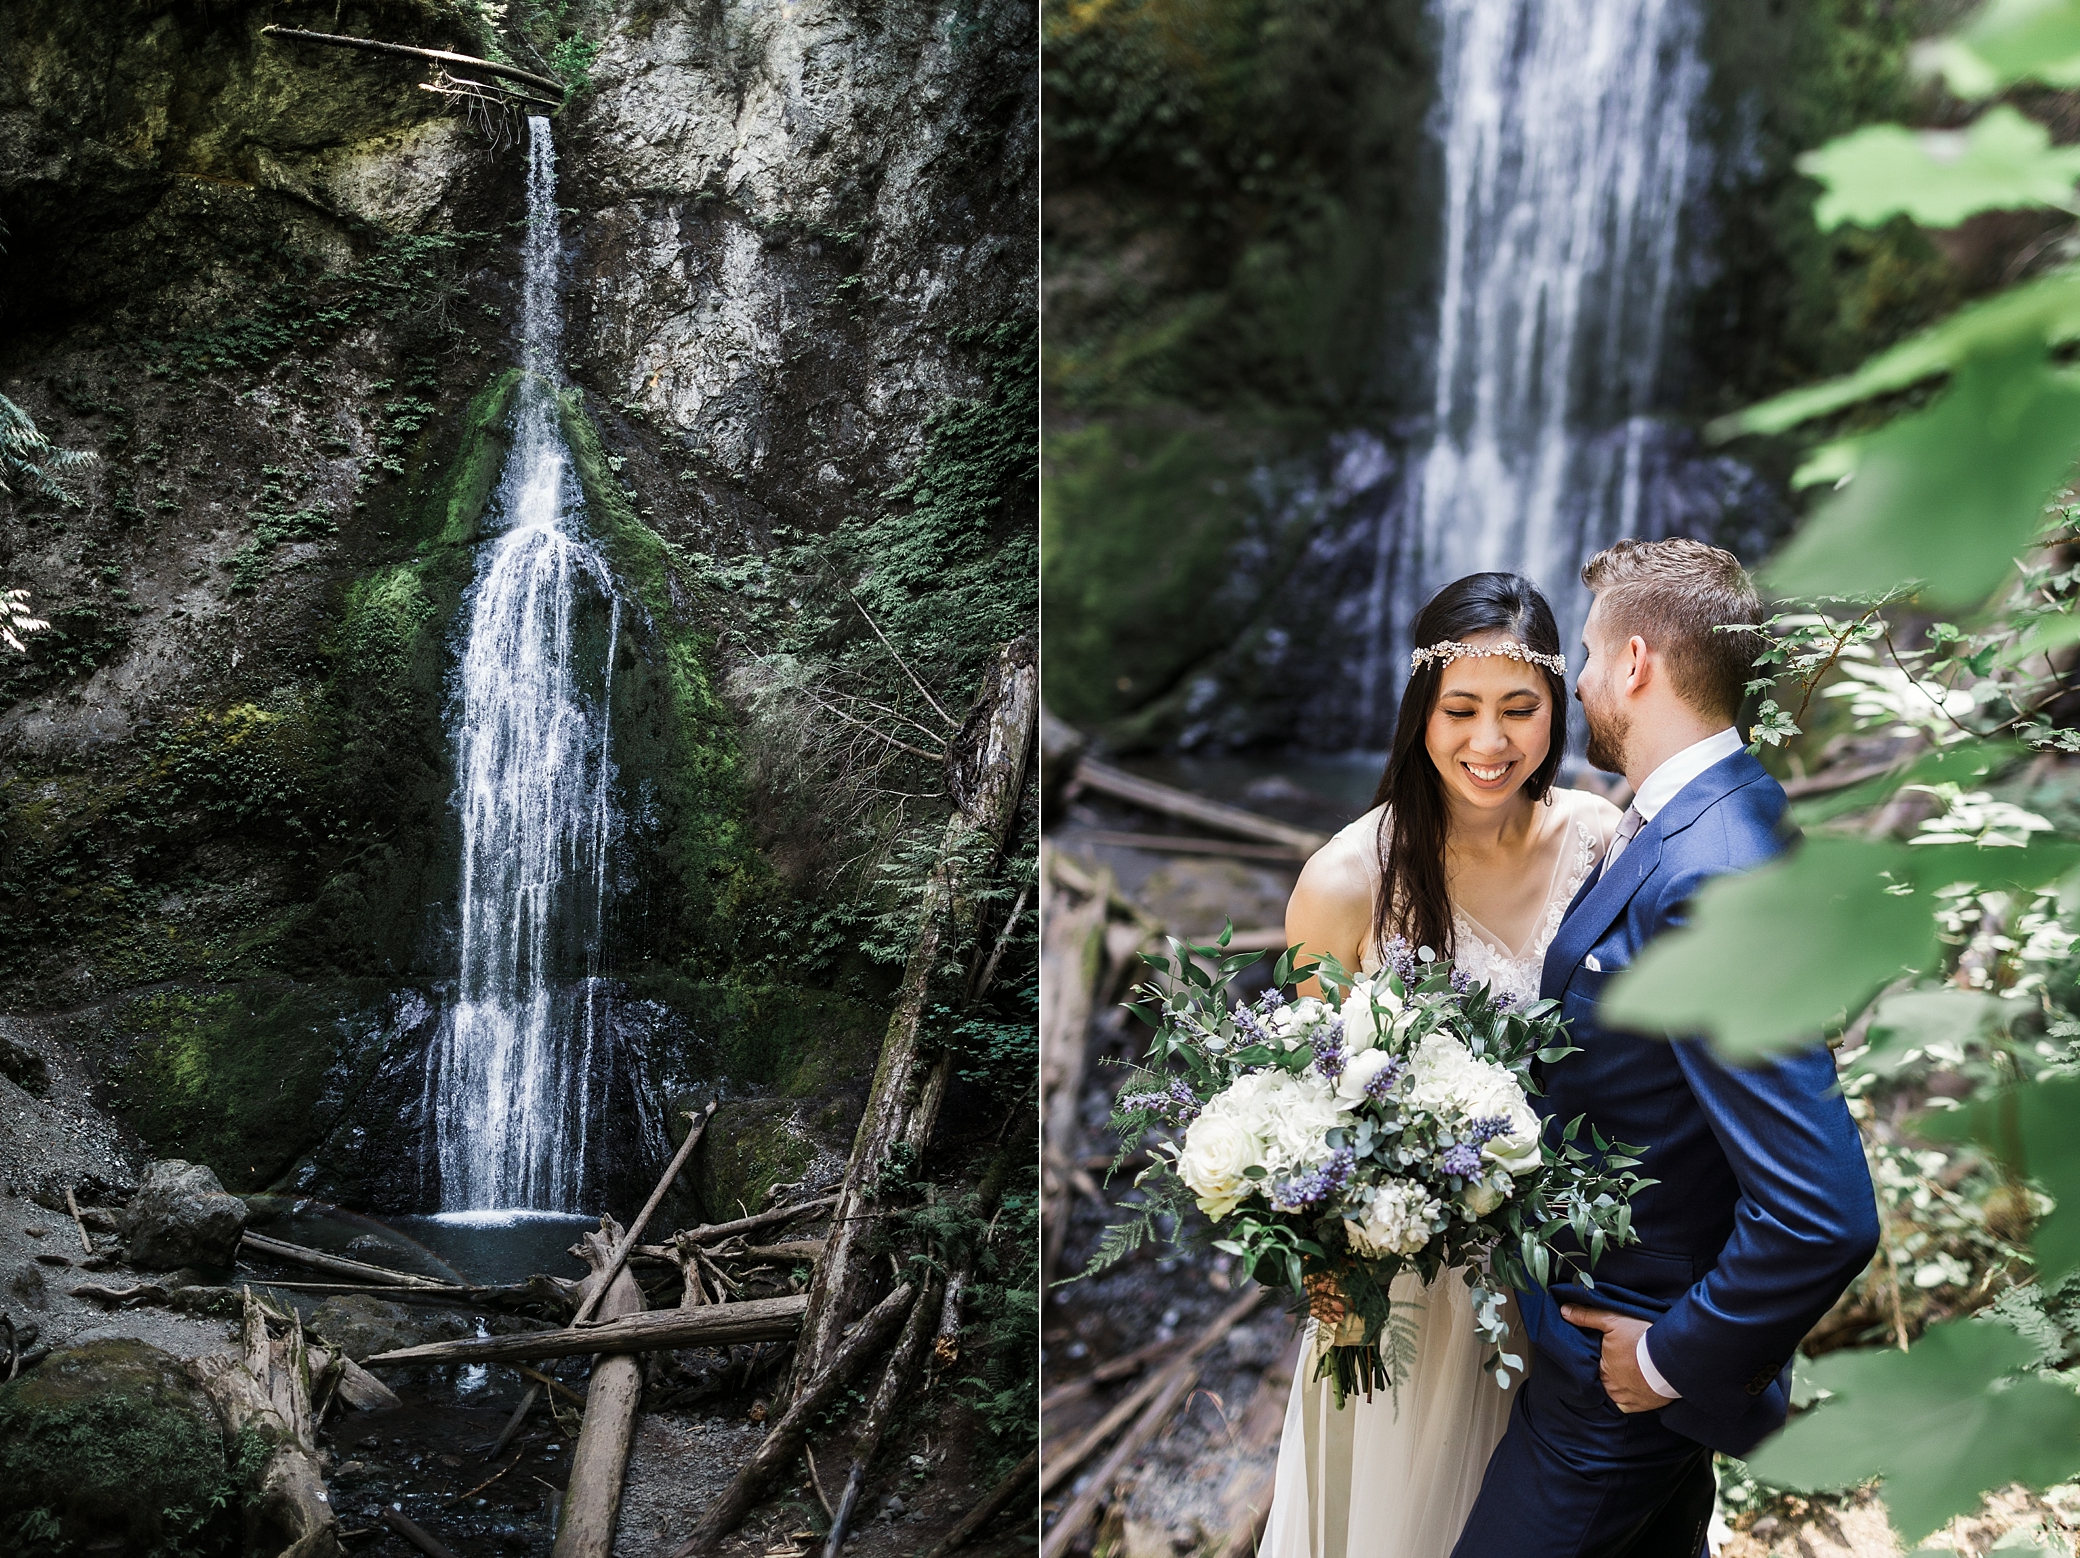 Elopement at Marymere Falls in the Olympic National Park | Megan Montalvo Photography